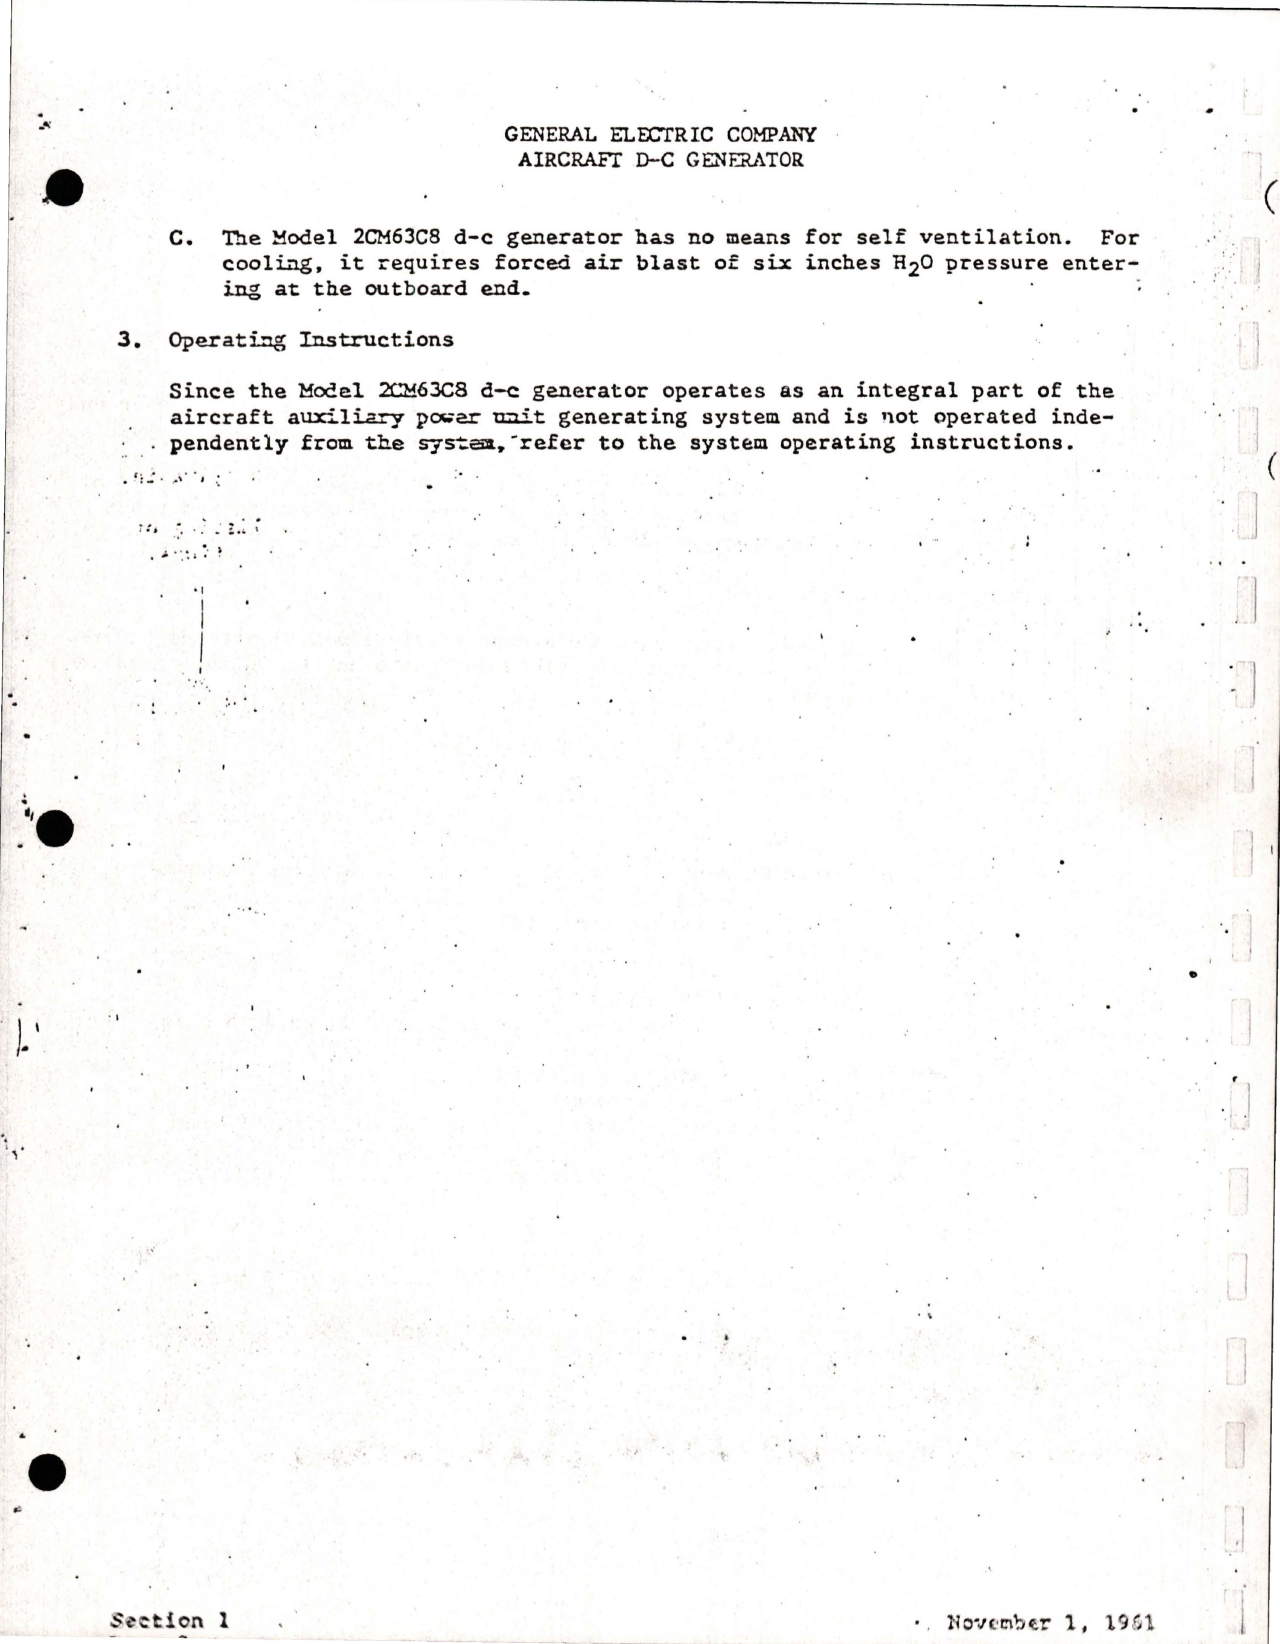 Sample page 5 from AirCorps Library document: Overhaul Instructions with Parts Breakdown for Aircraft DC Generator - Model 2CM63C8